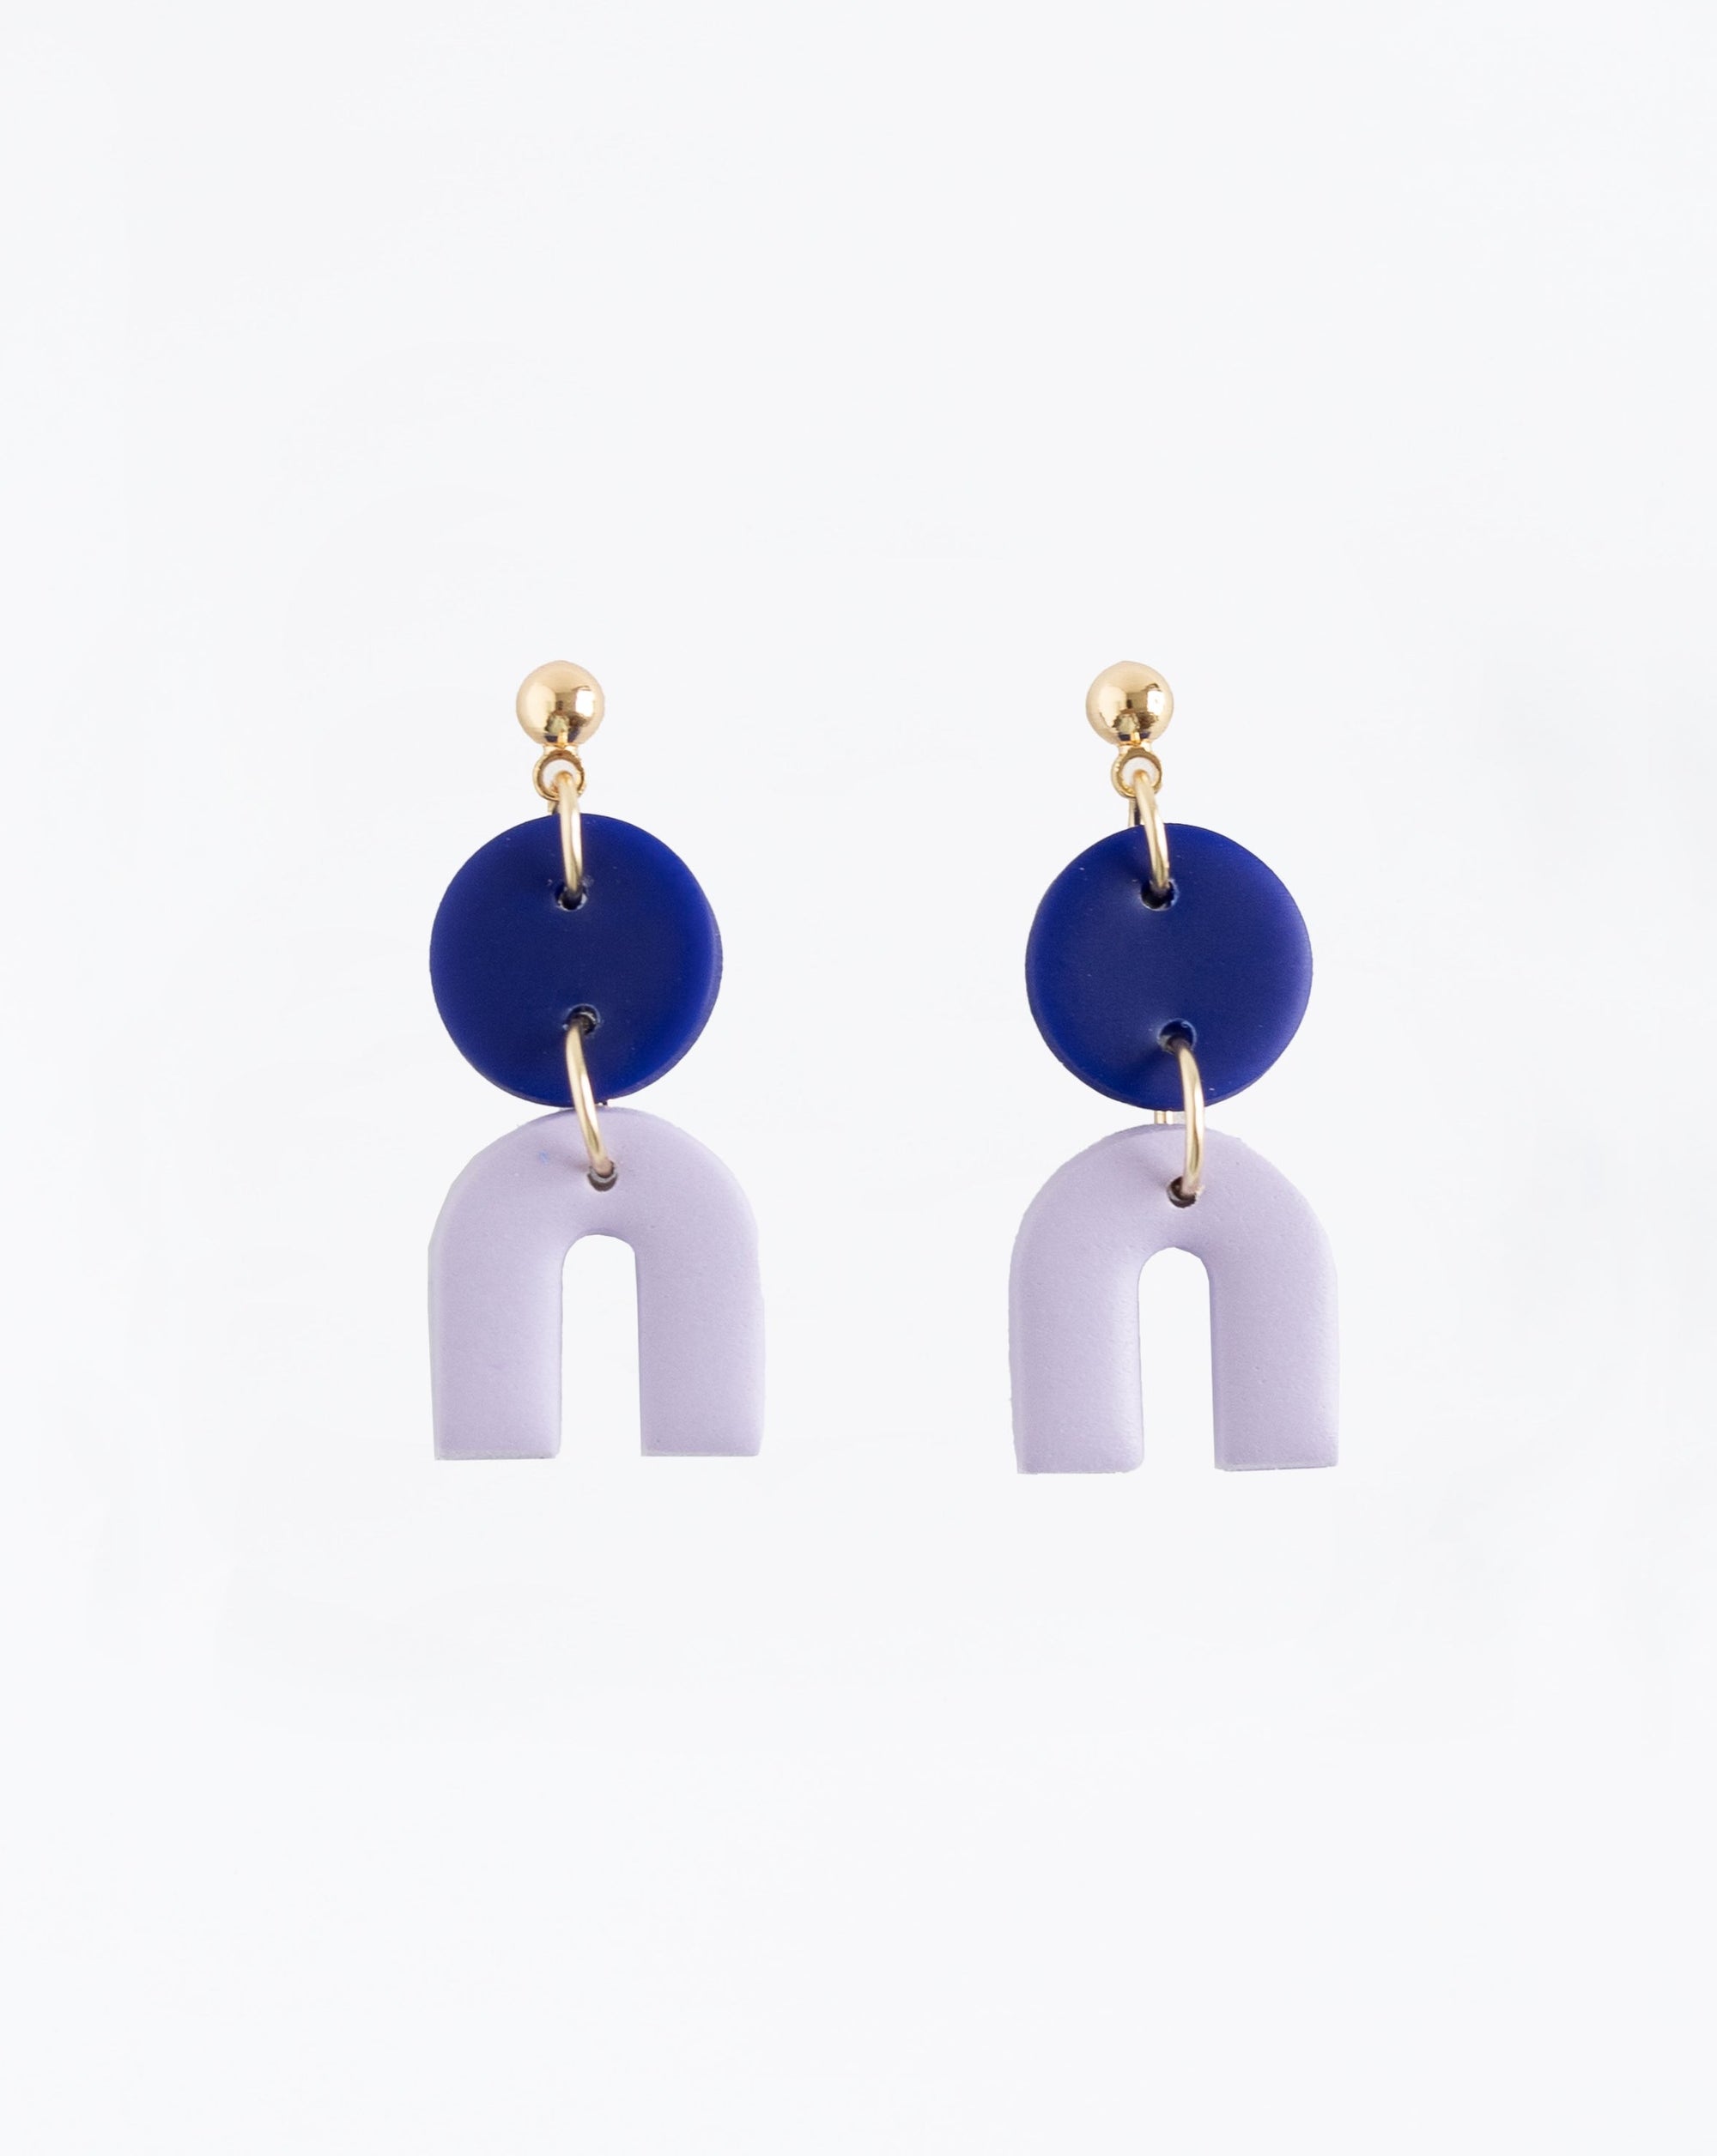 Tiny Arch earrings in two part of Hue Blue and lilac  clay parts with Gold plated Ball studs.